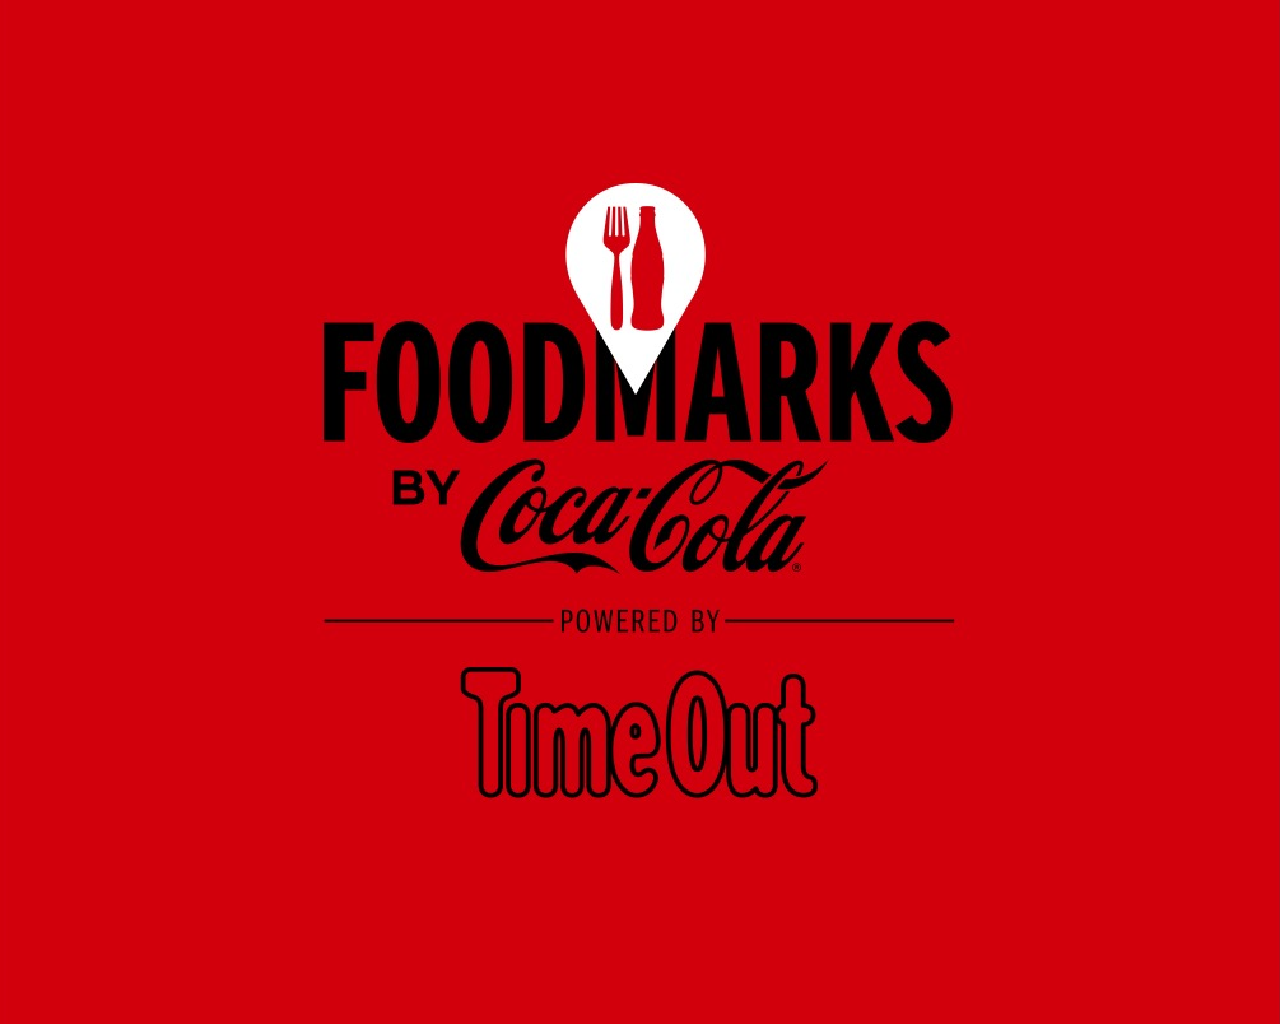 foodmarks by coca-cola x timeout